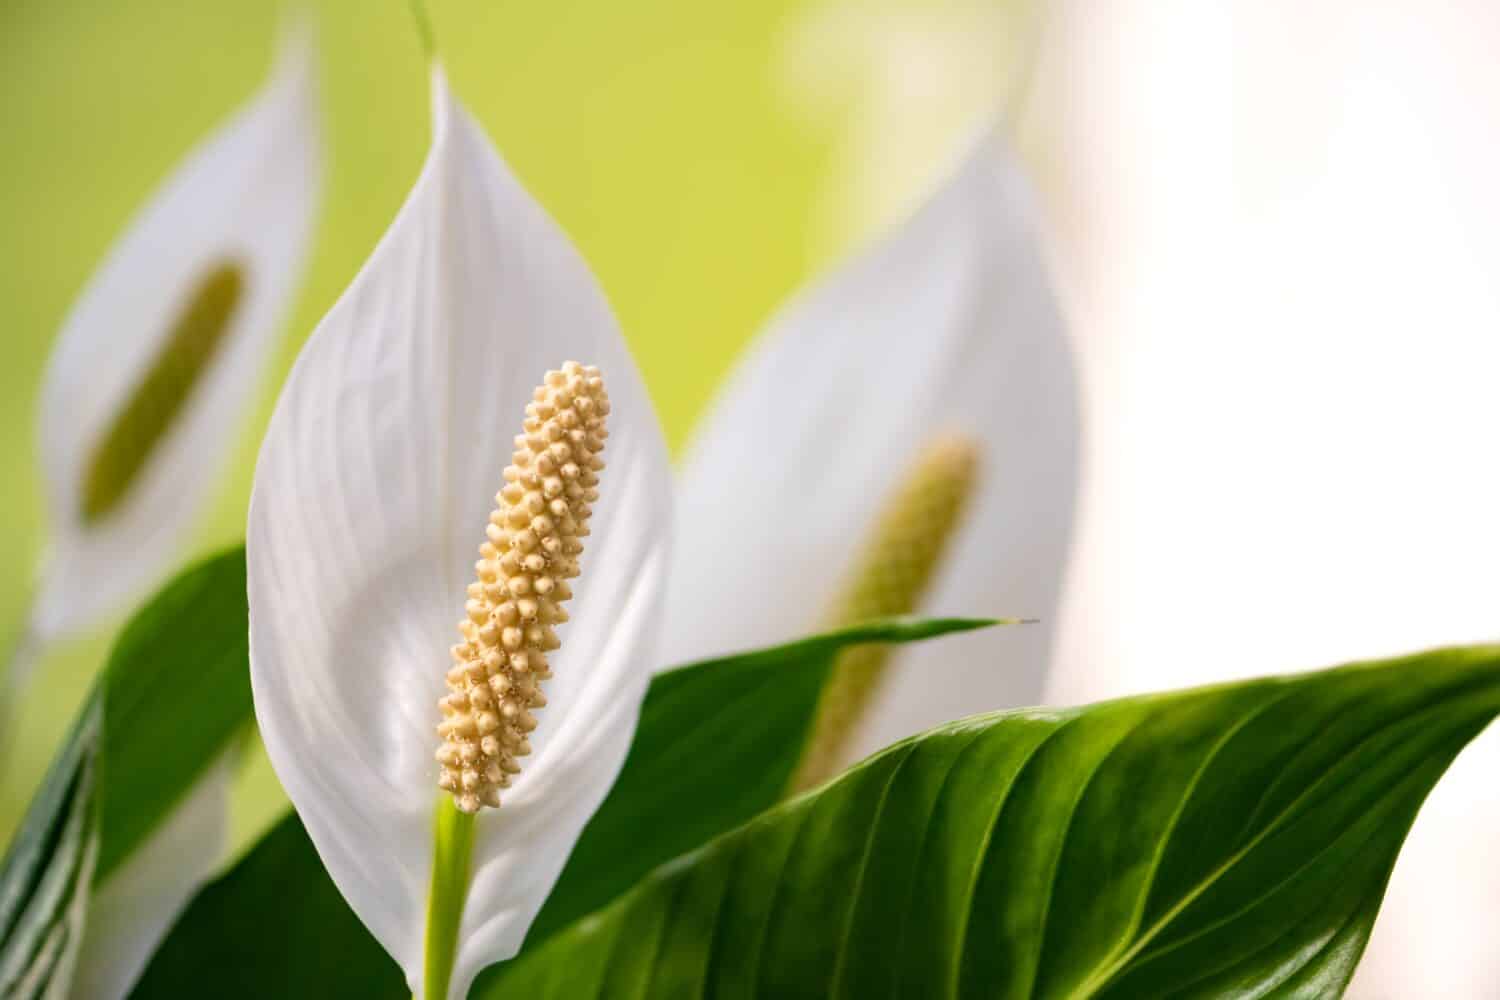 Spath or peace lilies (Spathiphyllum) is a monocotyledonous flowering plant in the family Araceae, native to tropical regions of America and Asia. Macro close up of white flowers in bright sunlight.